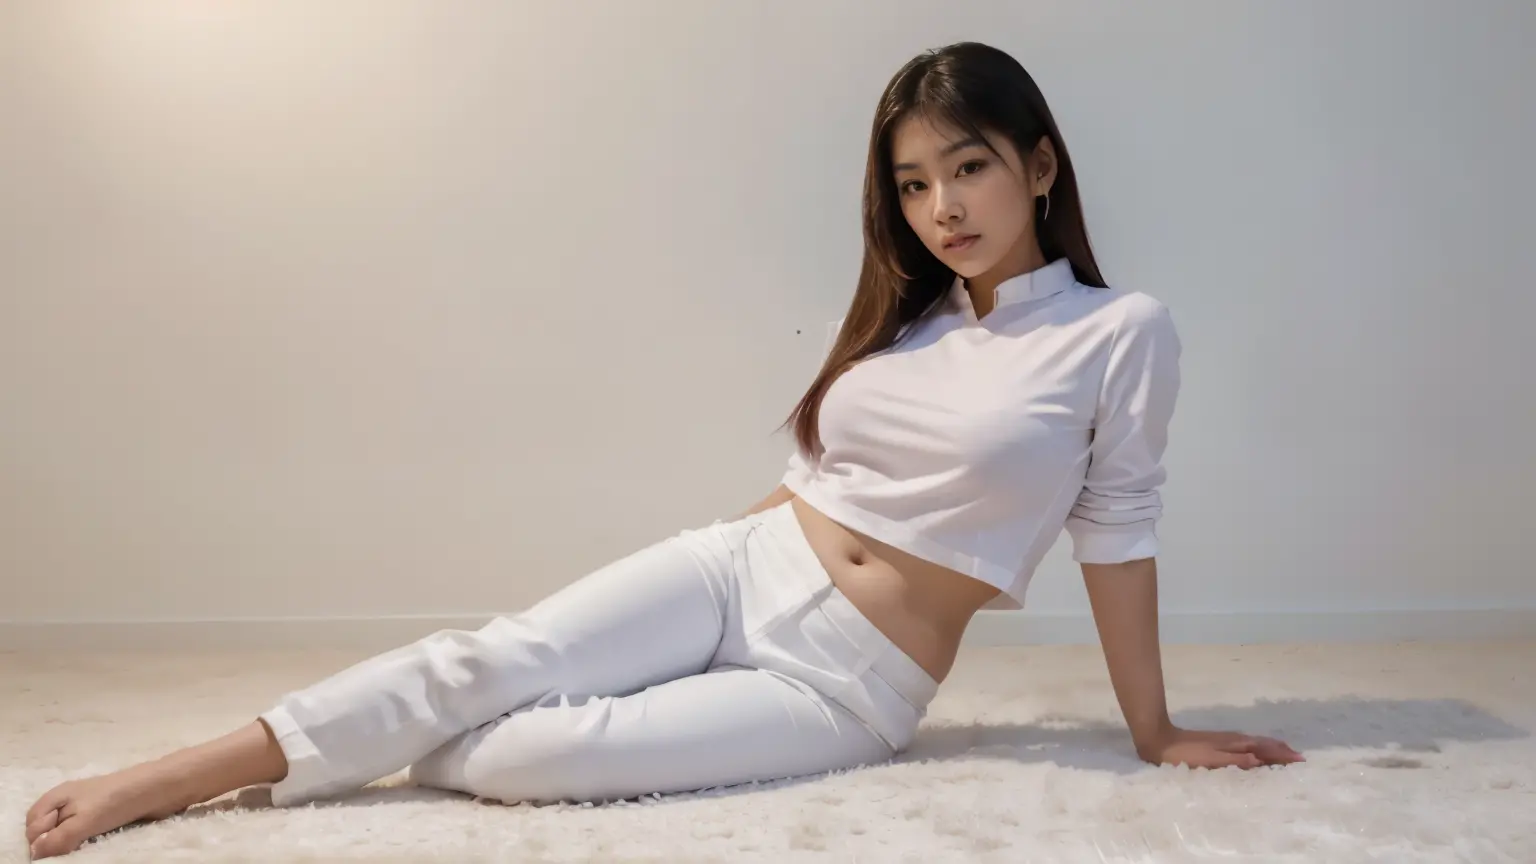 8k ultra realistic photos, ((Image must match text)) ((cubby Asian women, height 150 cm and body shape 59 kg/m2)) White coat, pink shirt, white pants, lying down on the floor, cool, bold, ((Full body photo visible)) White wall background,